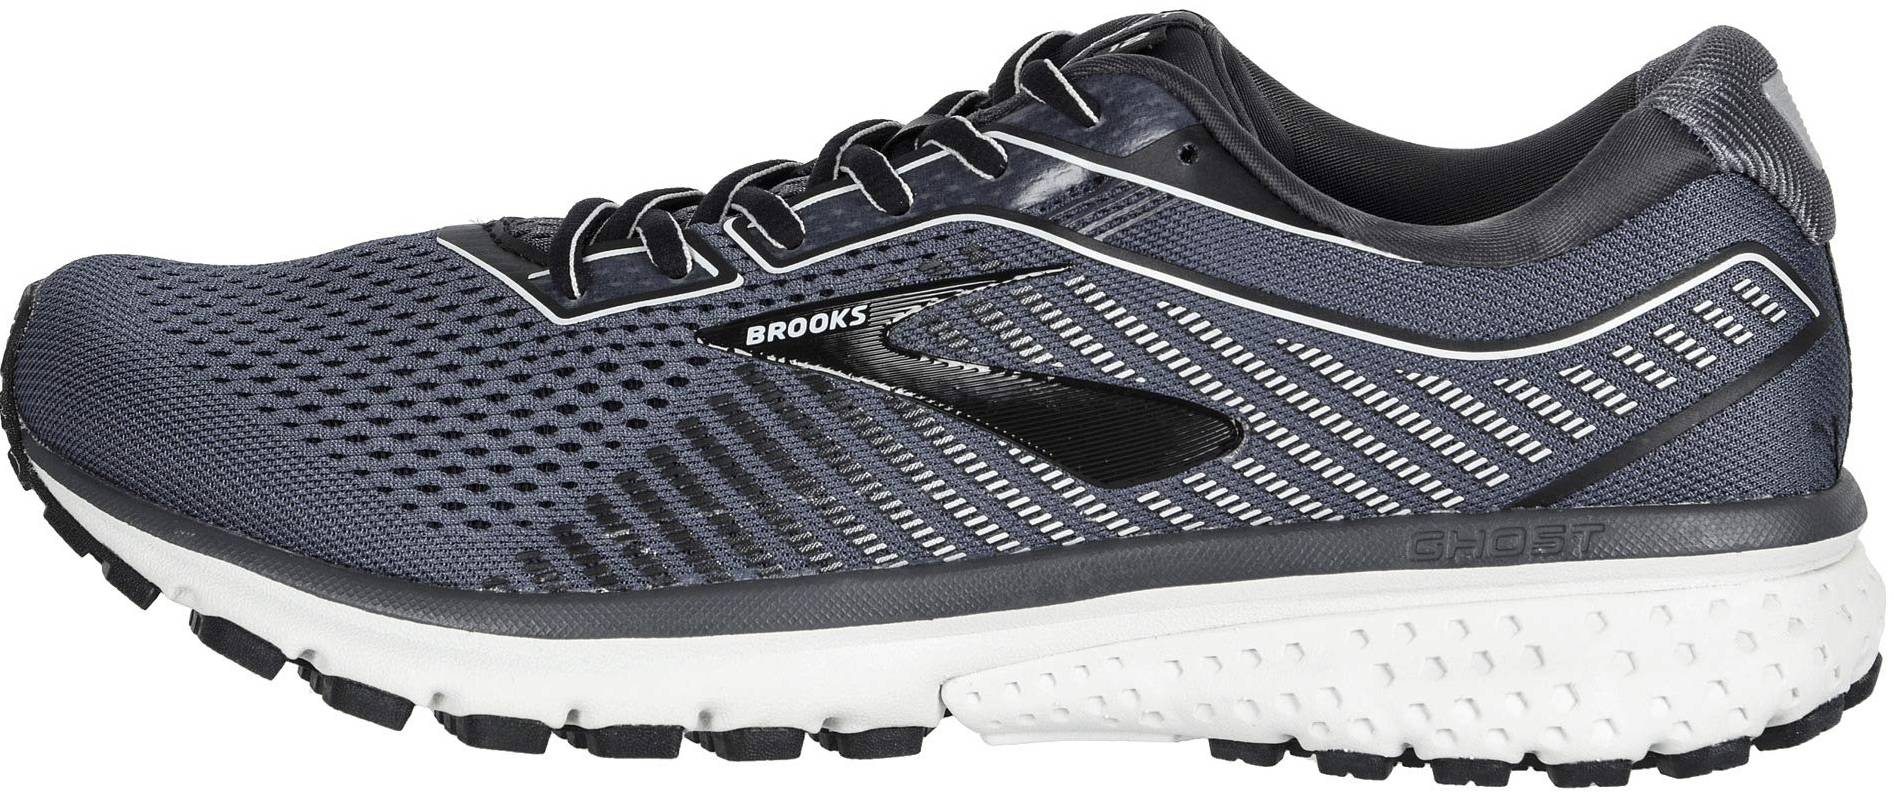 Save 38% on Brooks Running Shoes (130 